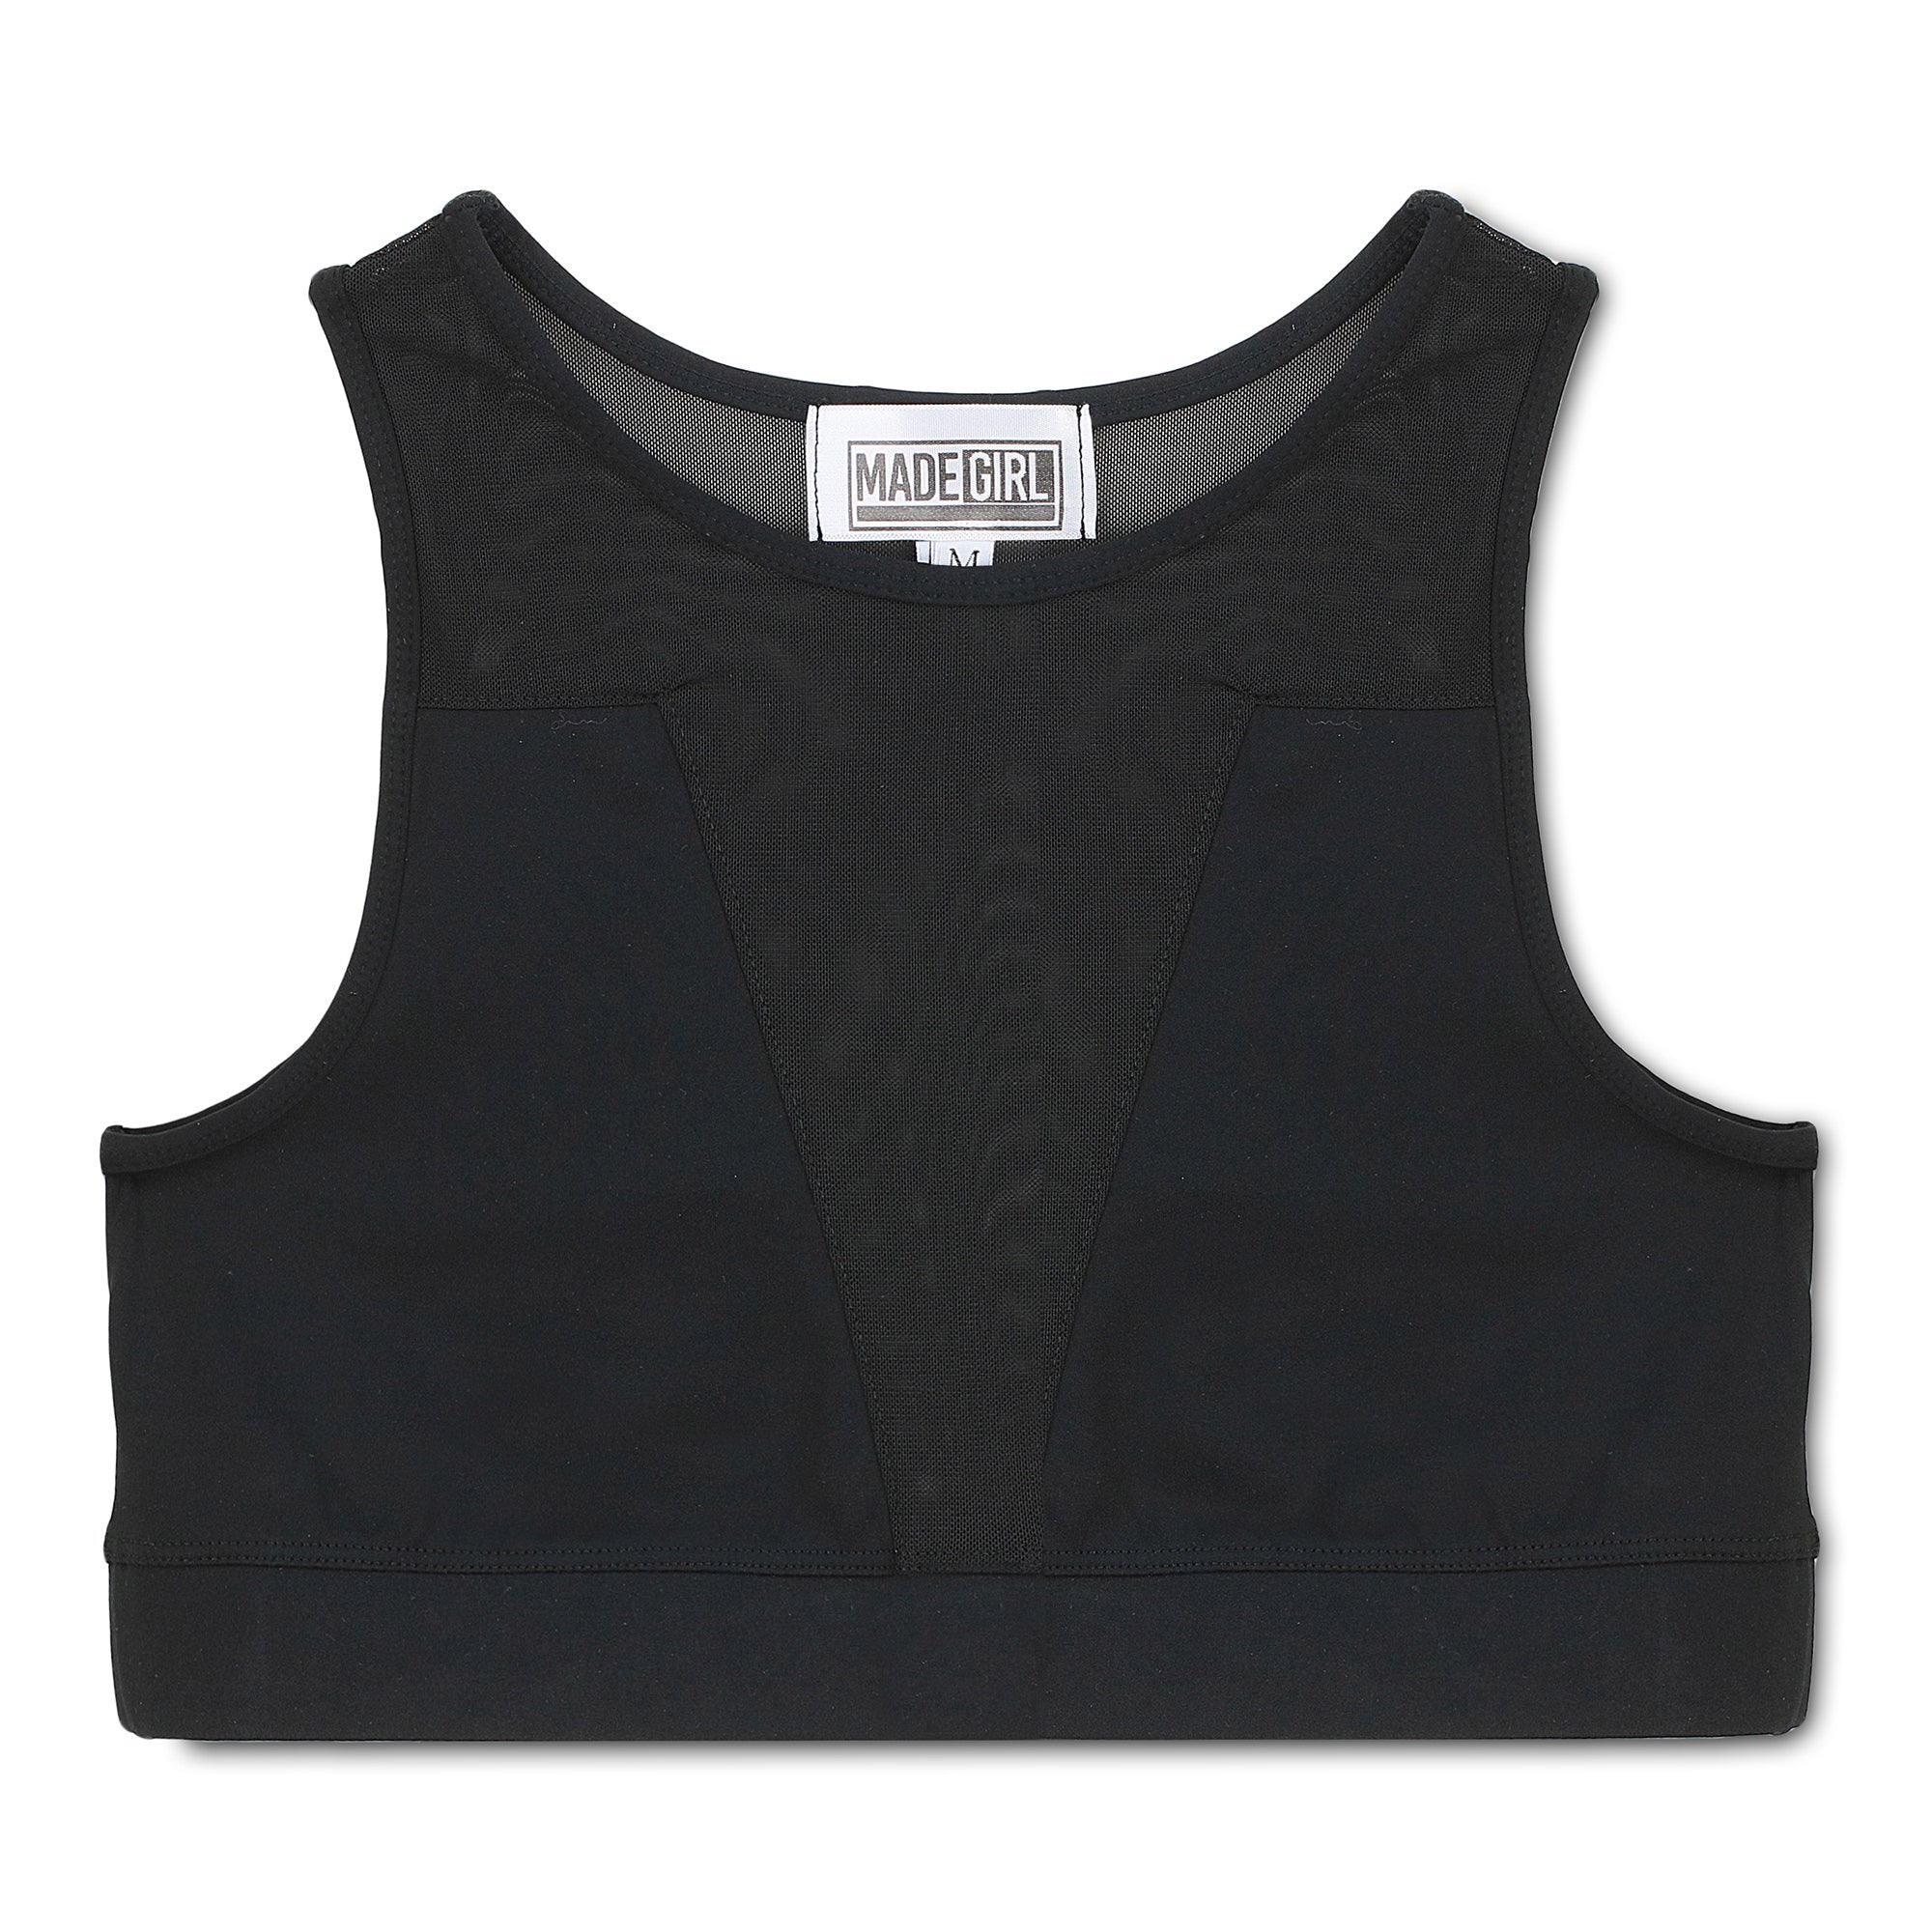 ELITE COLLECTION** Black Sports Bra styled with a V-Shaped Mesh